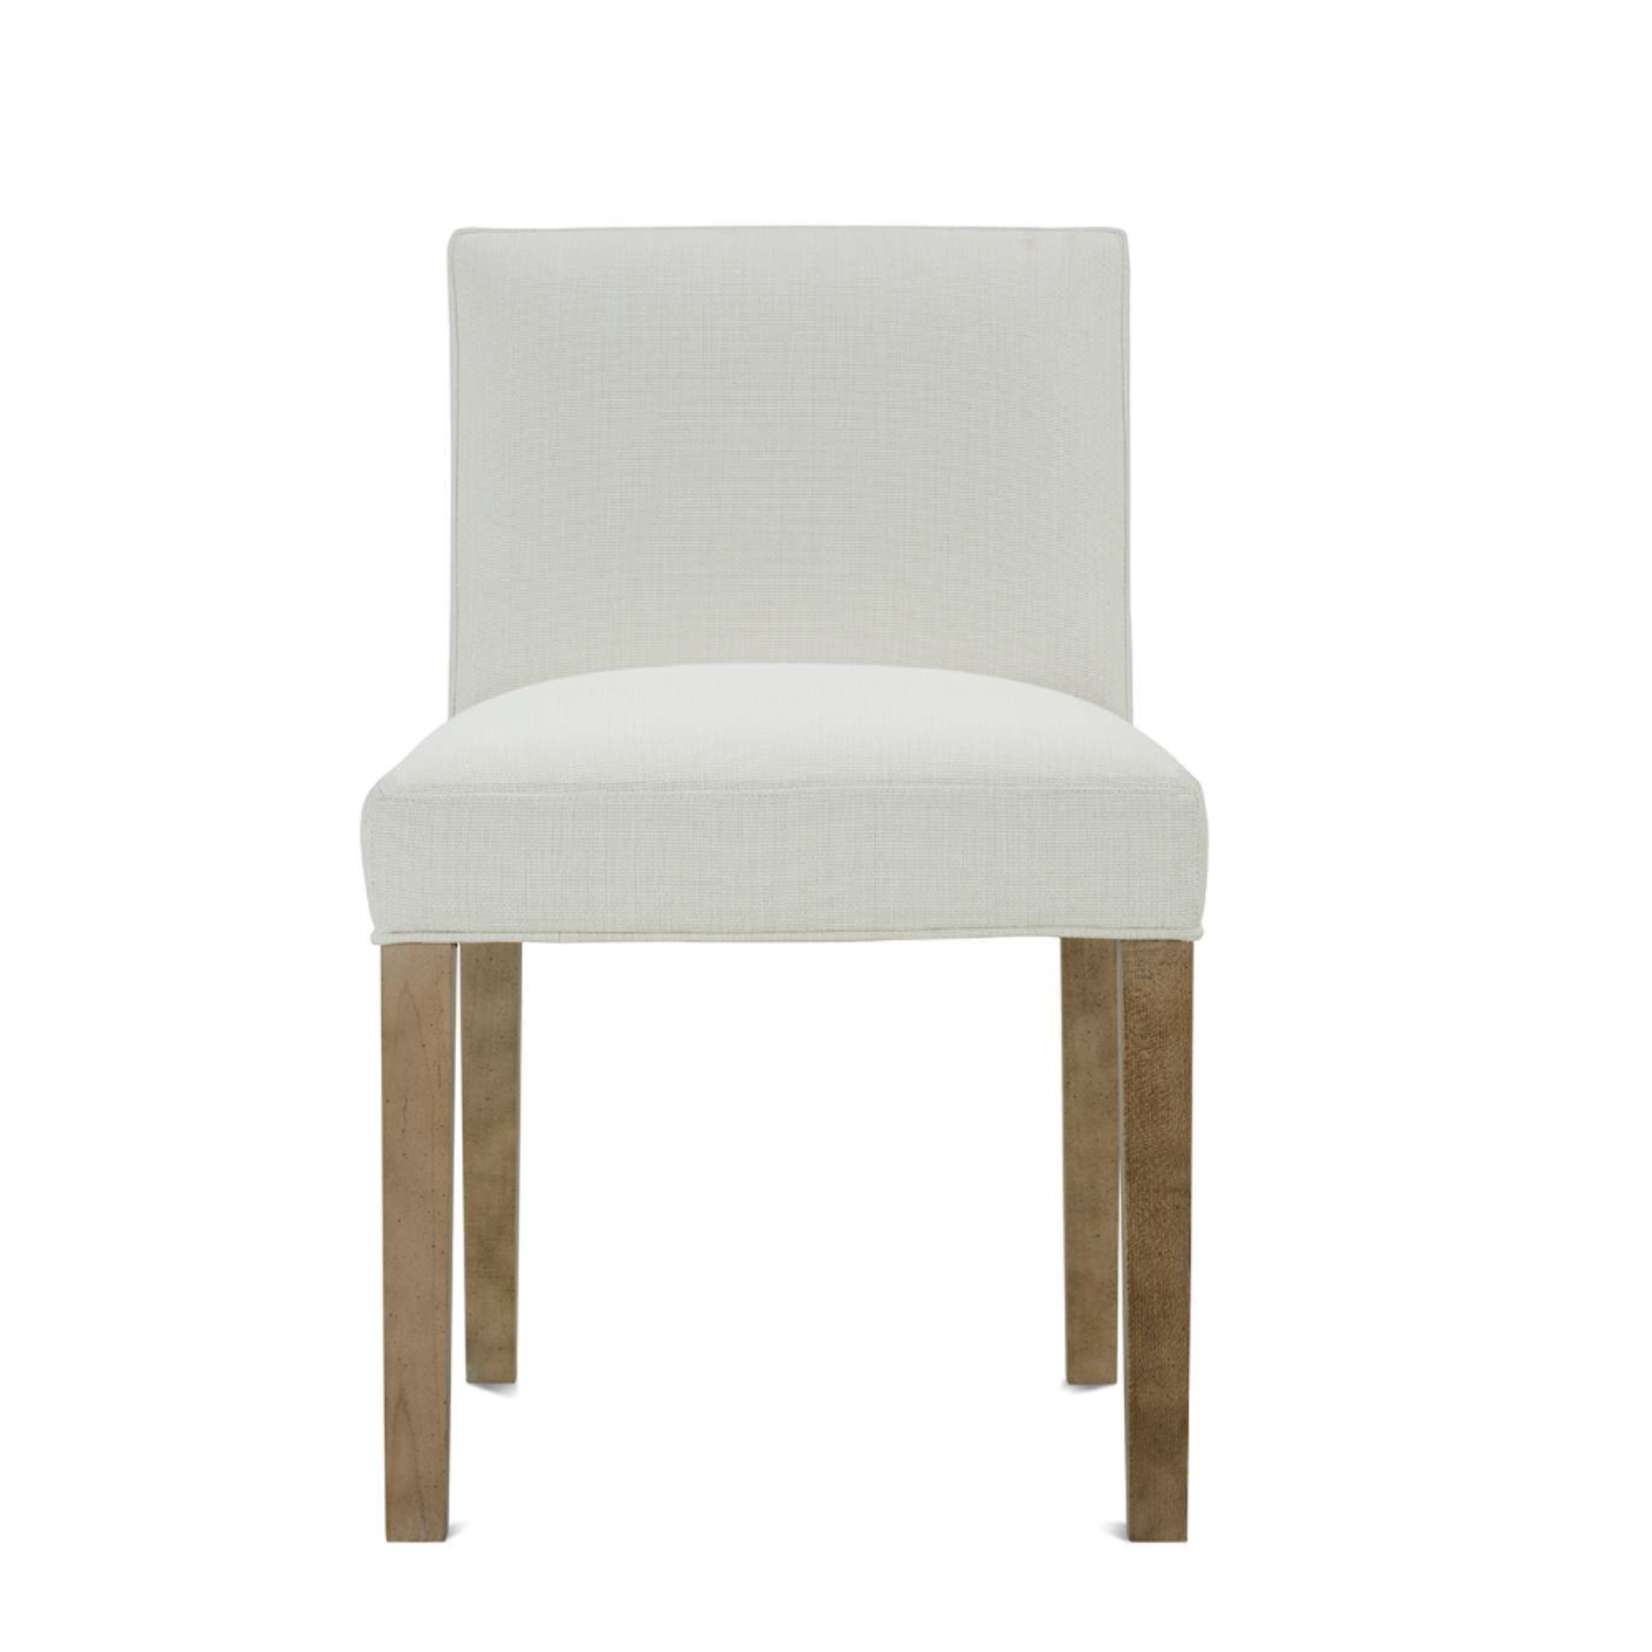 Outside The Box Odessa Chalk White Kid Proof Upholstered Performance Fabric Armless Dining Chair 1094